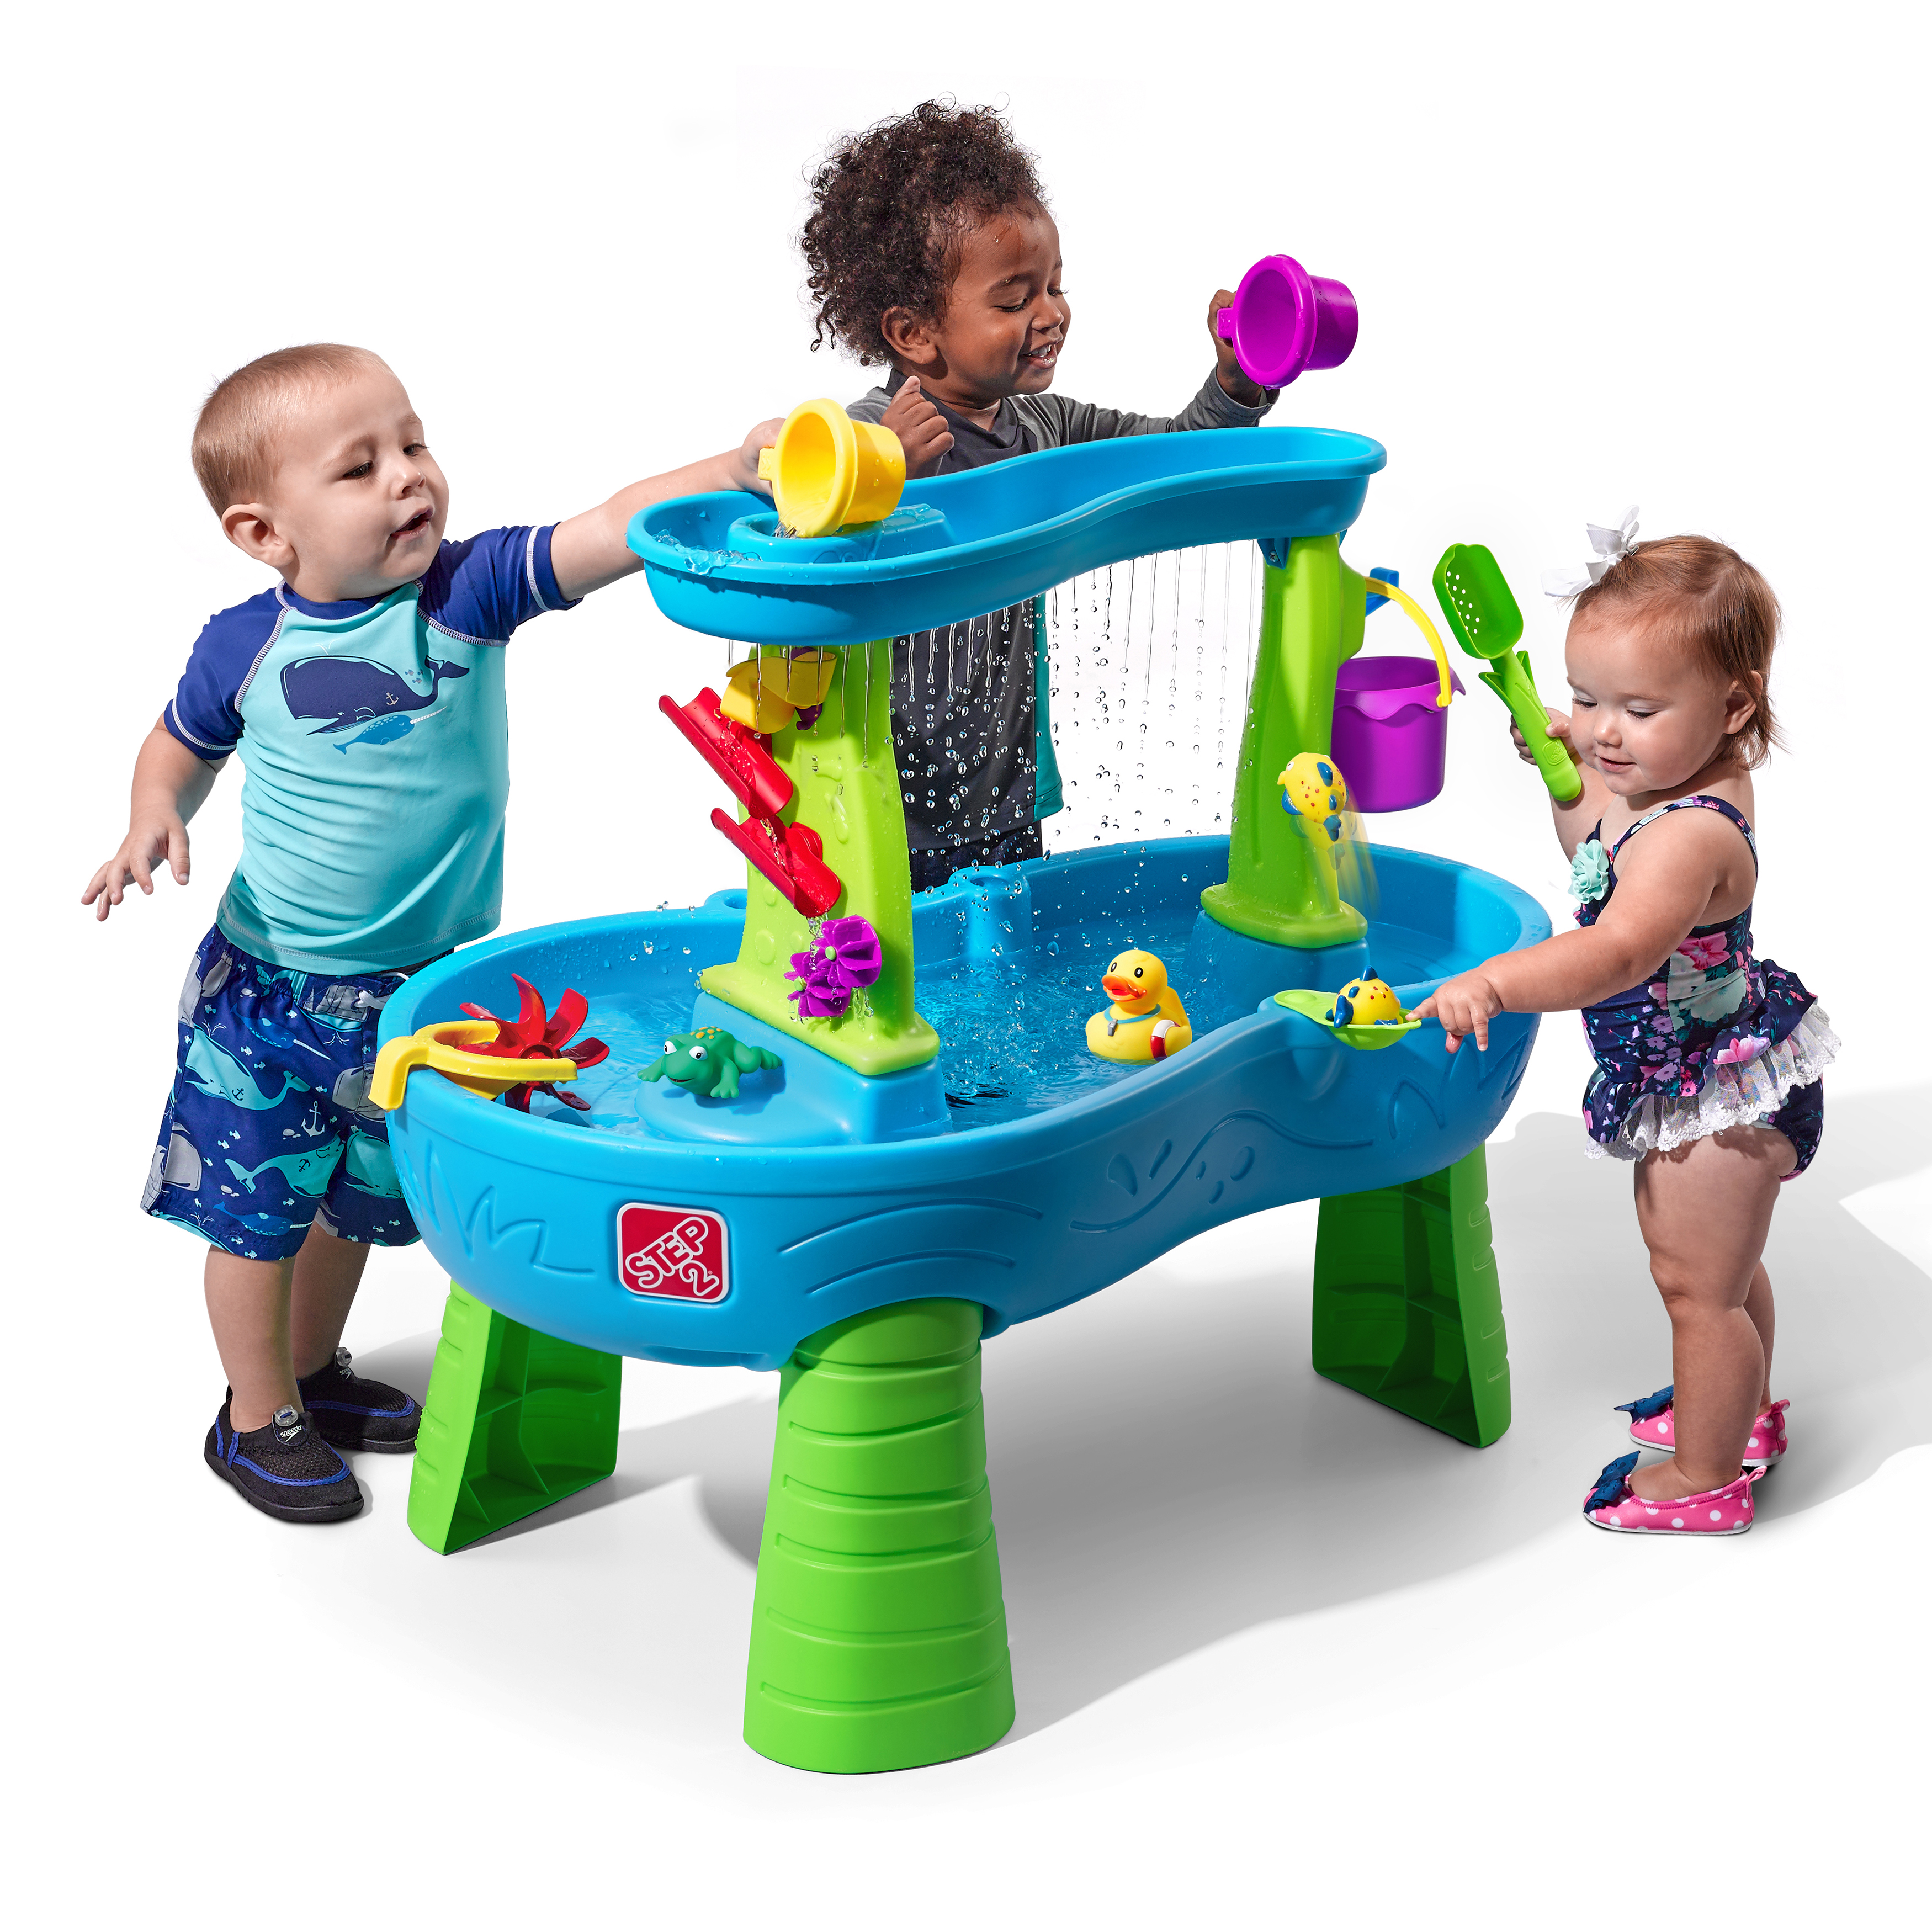 Step2 Rain Showers Splash Pond Blue Plastic Water Table for Toddlers - image 1 of 14